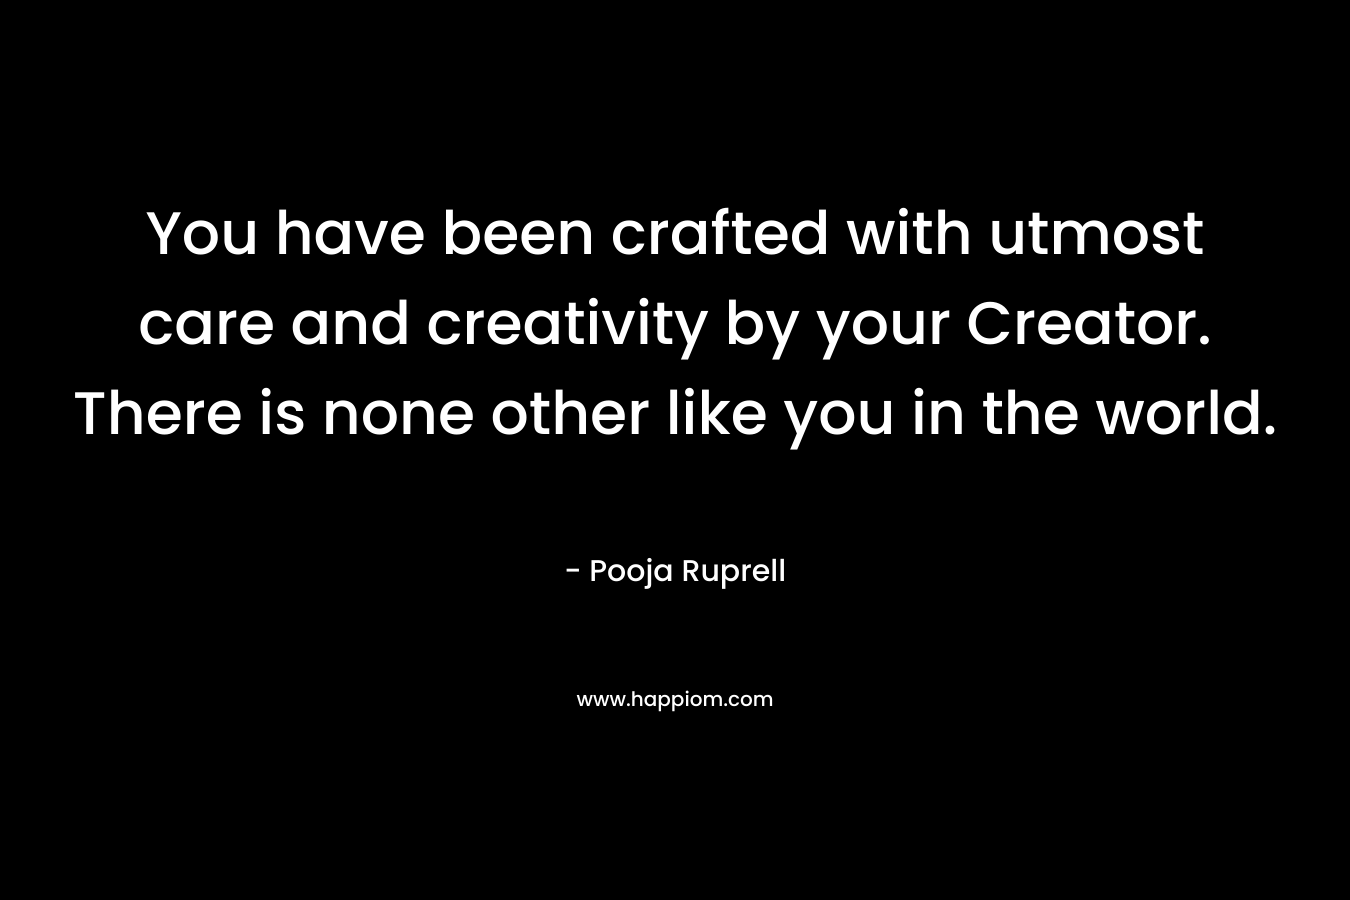 You have been crafted with utmost care and creativity by your Creator. There is none other like you in the world.